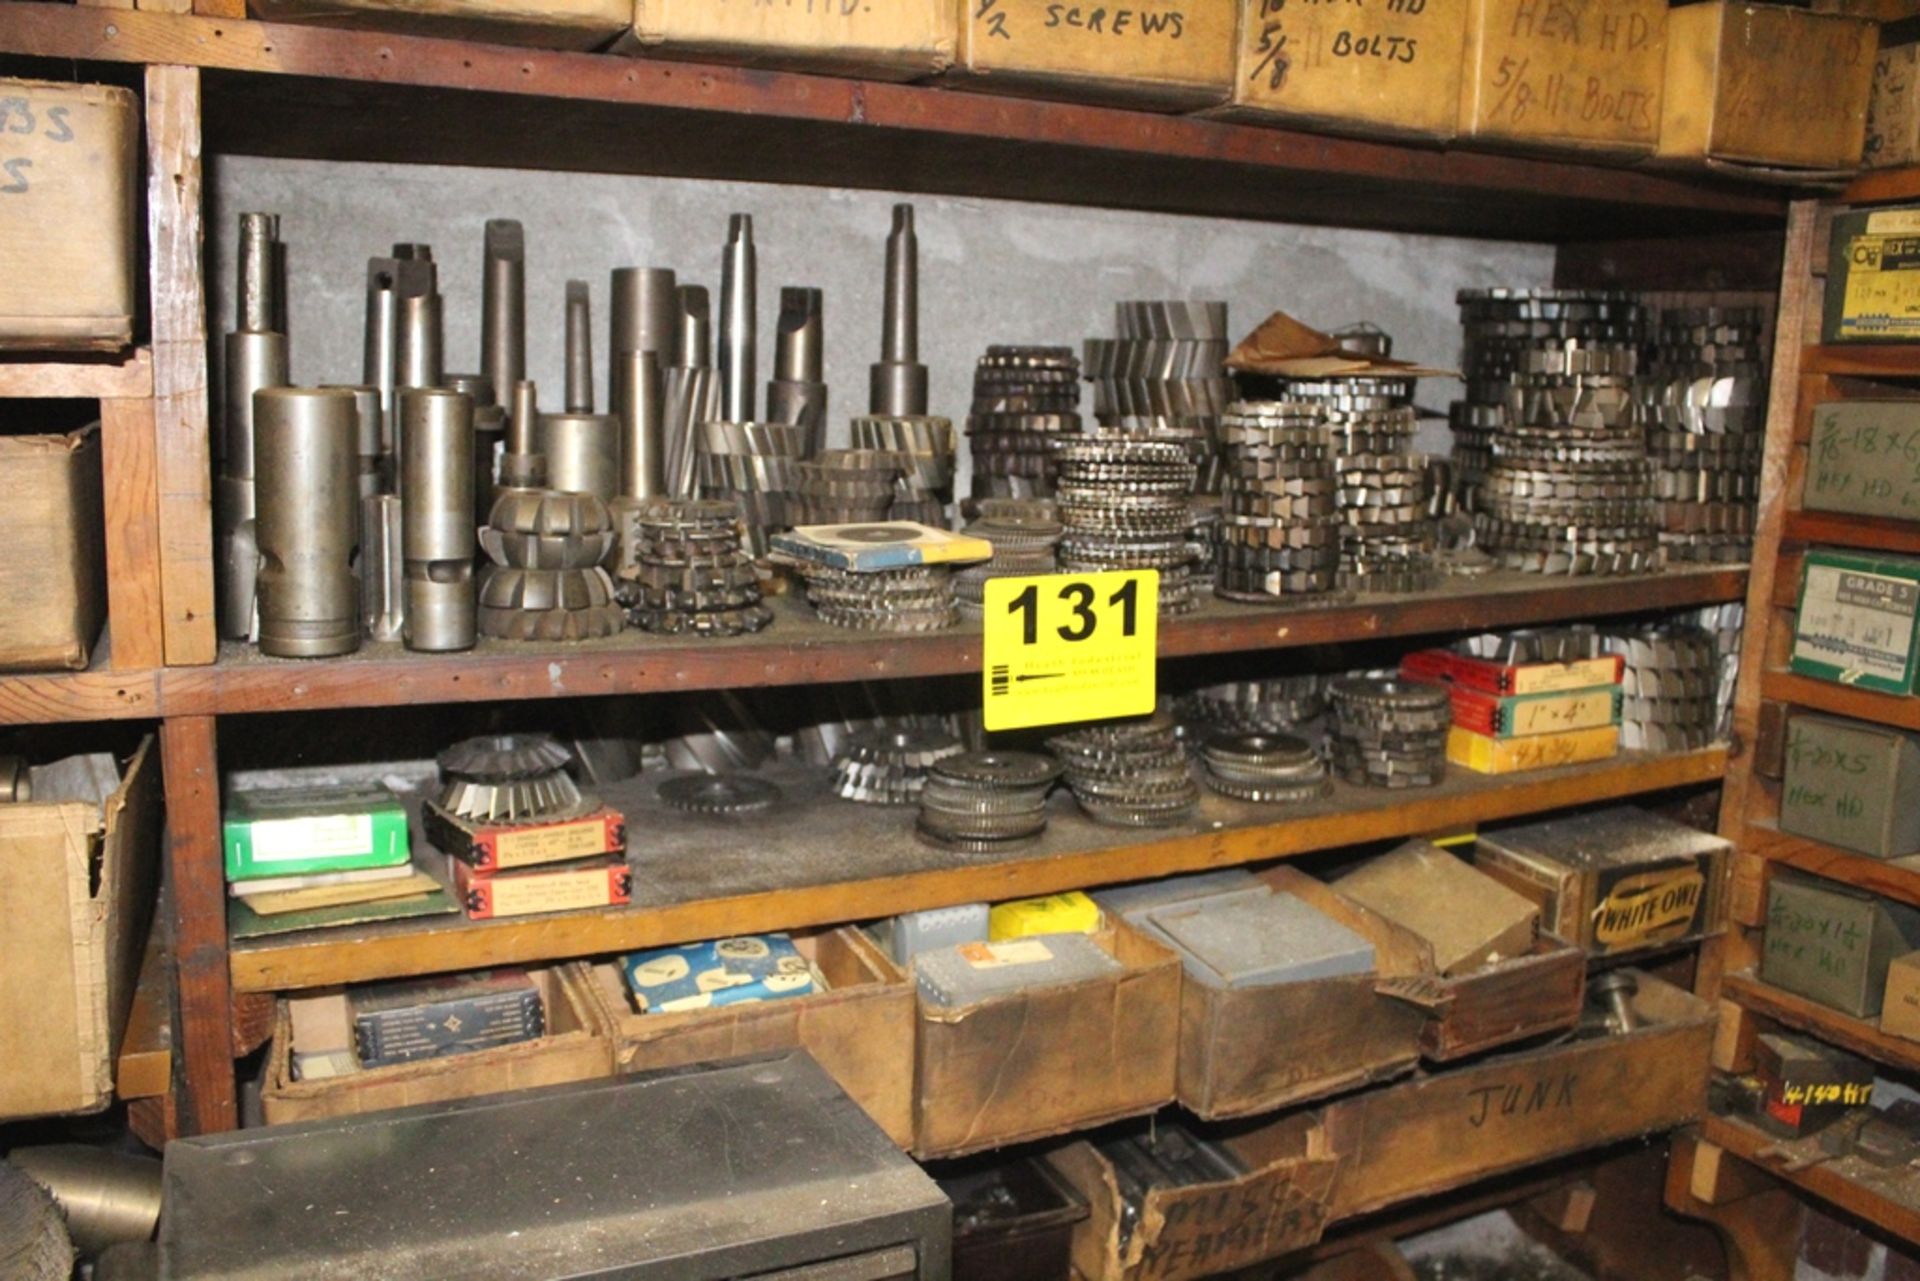 LARGE QTY OF MILLING CUTTERS ON (2) SHELVES